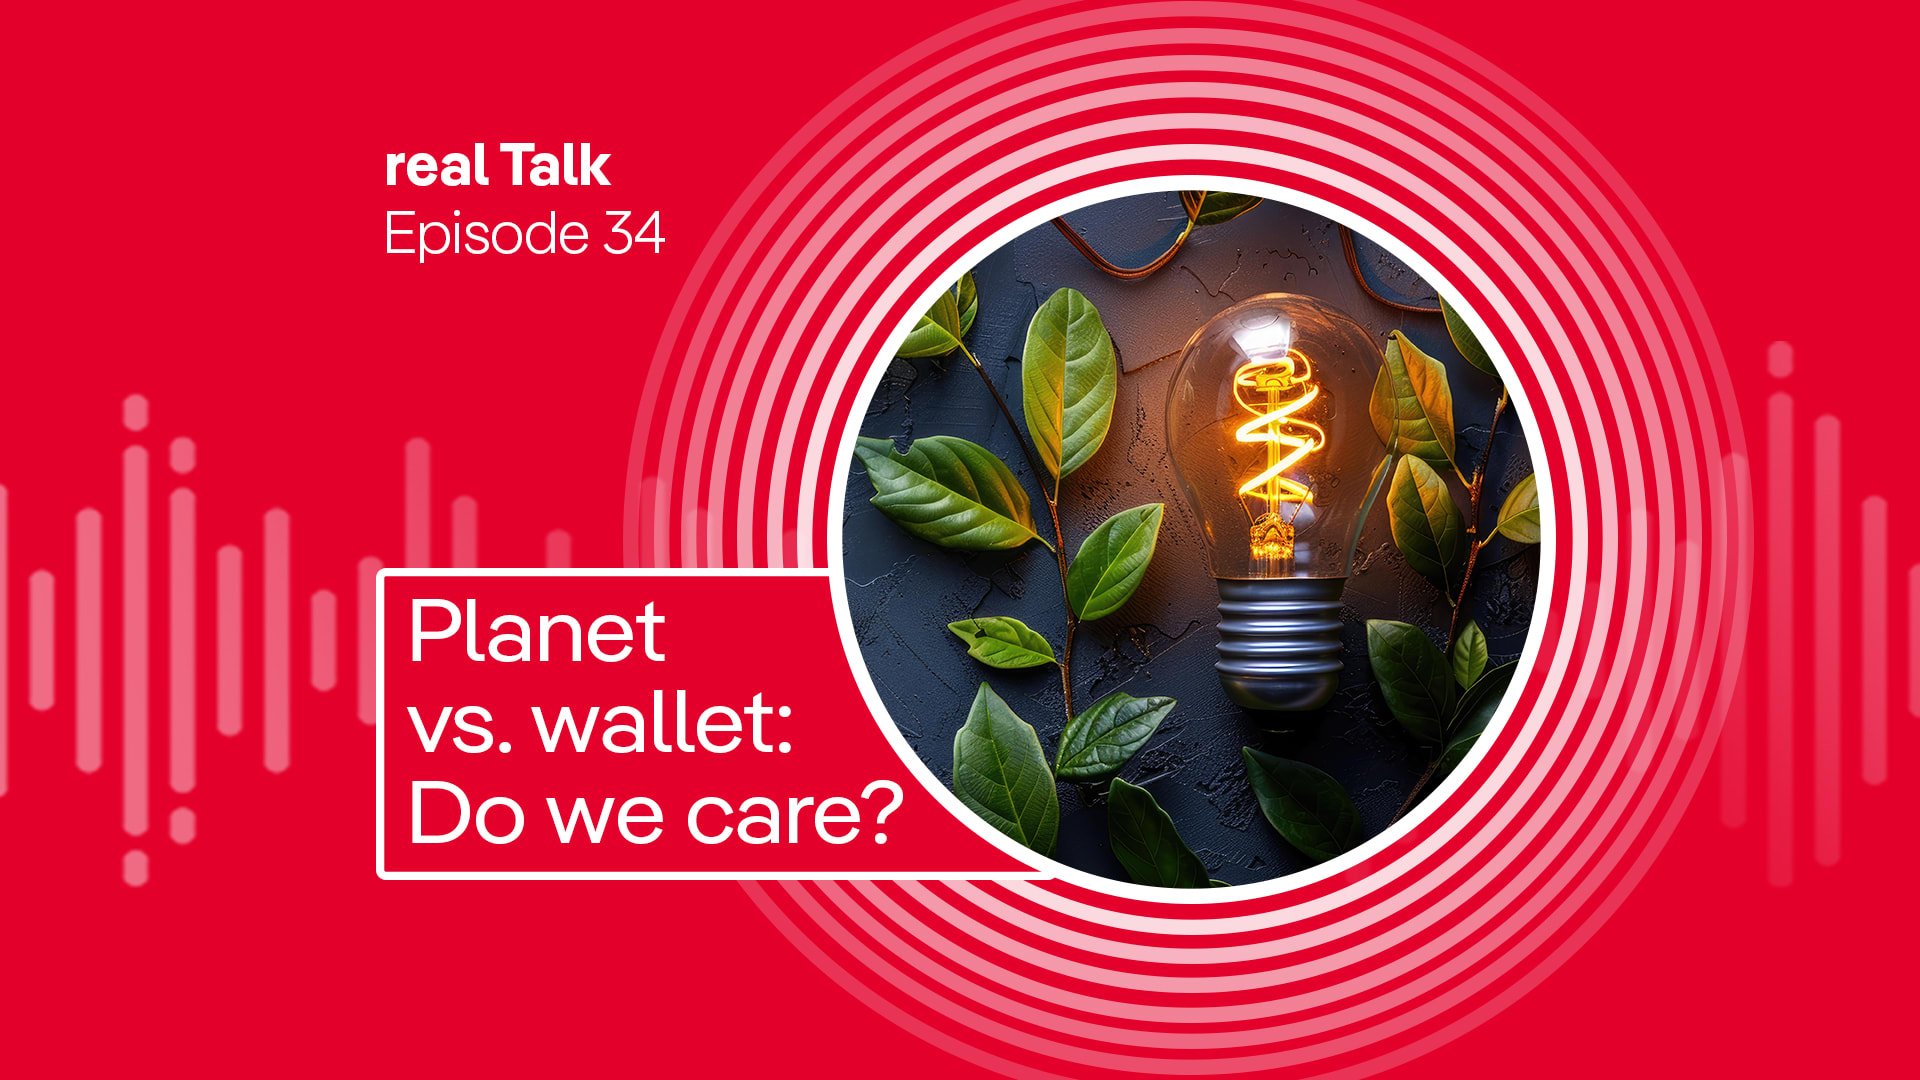 real Talk episode 34: planet V wallet – how much do Australians really care? [Video]